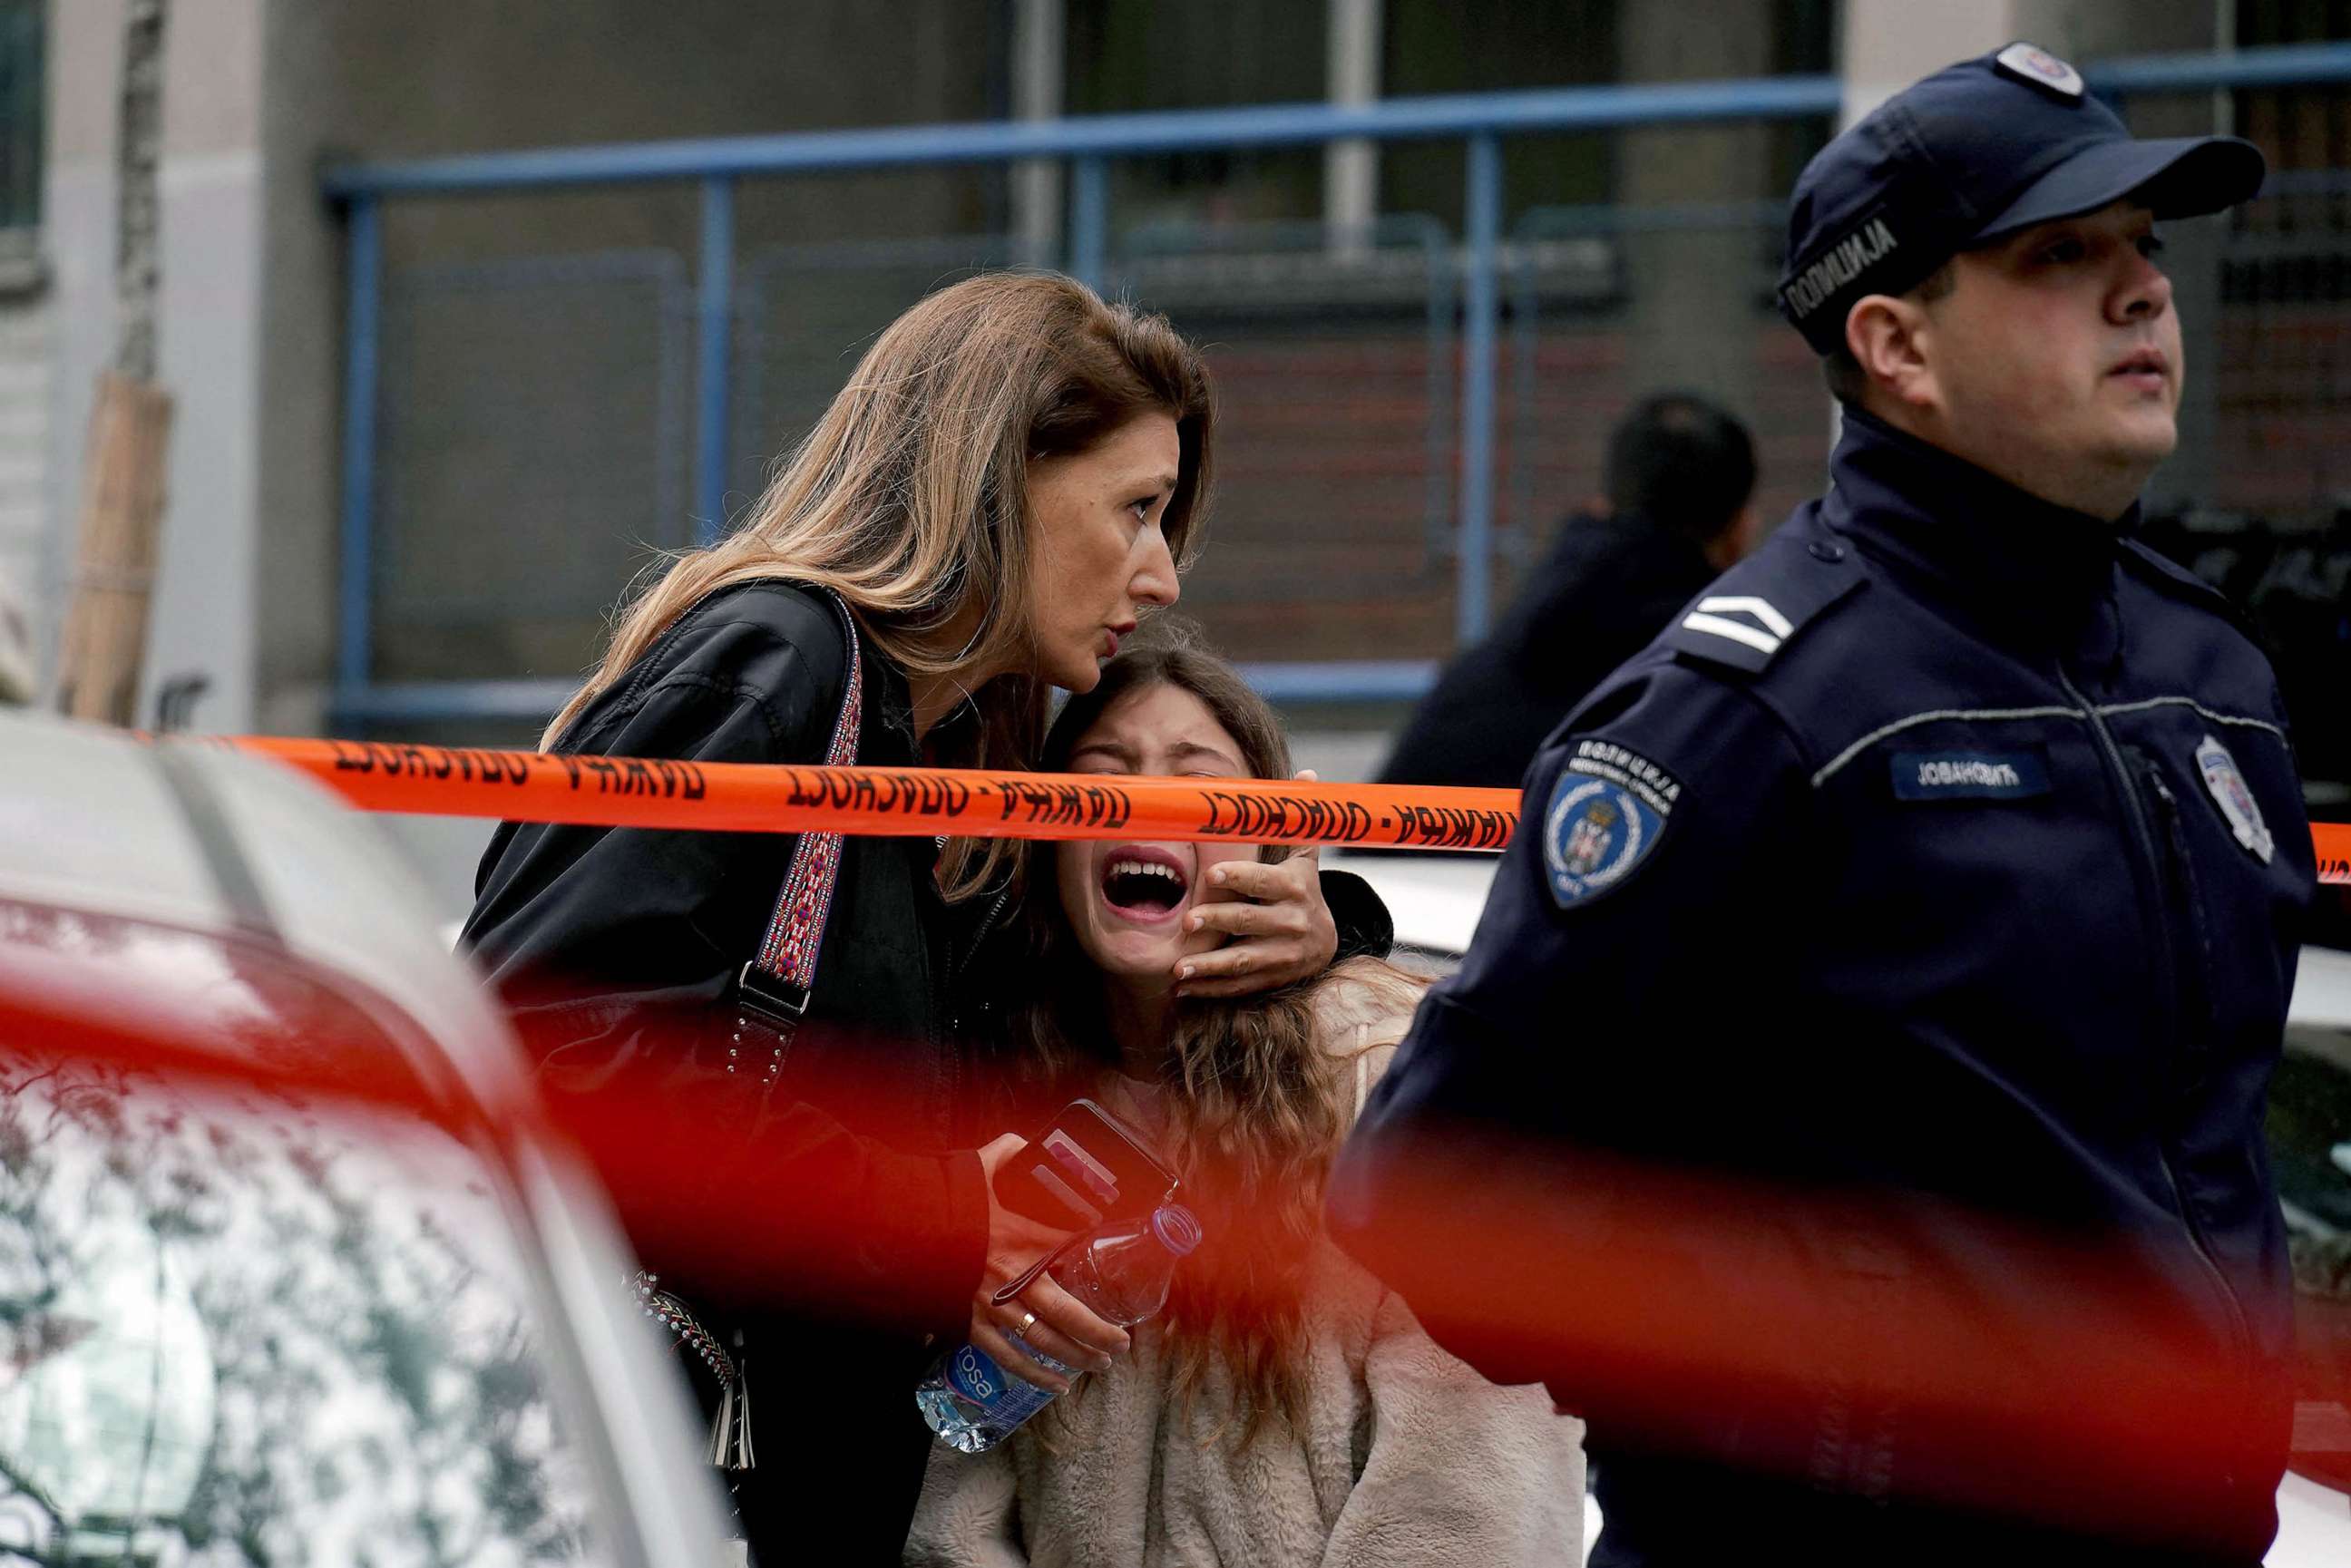 Nine killed in planned attack at Serbian school by 13-year-old boy